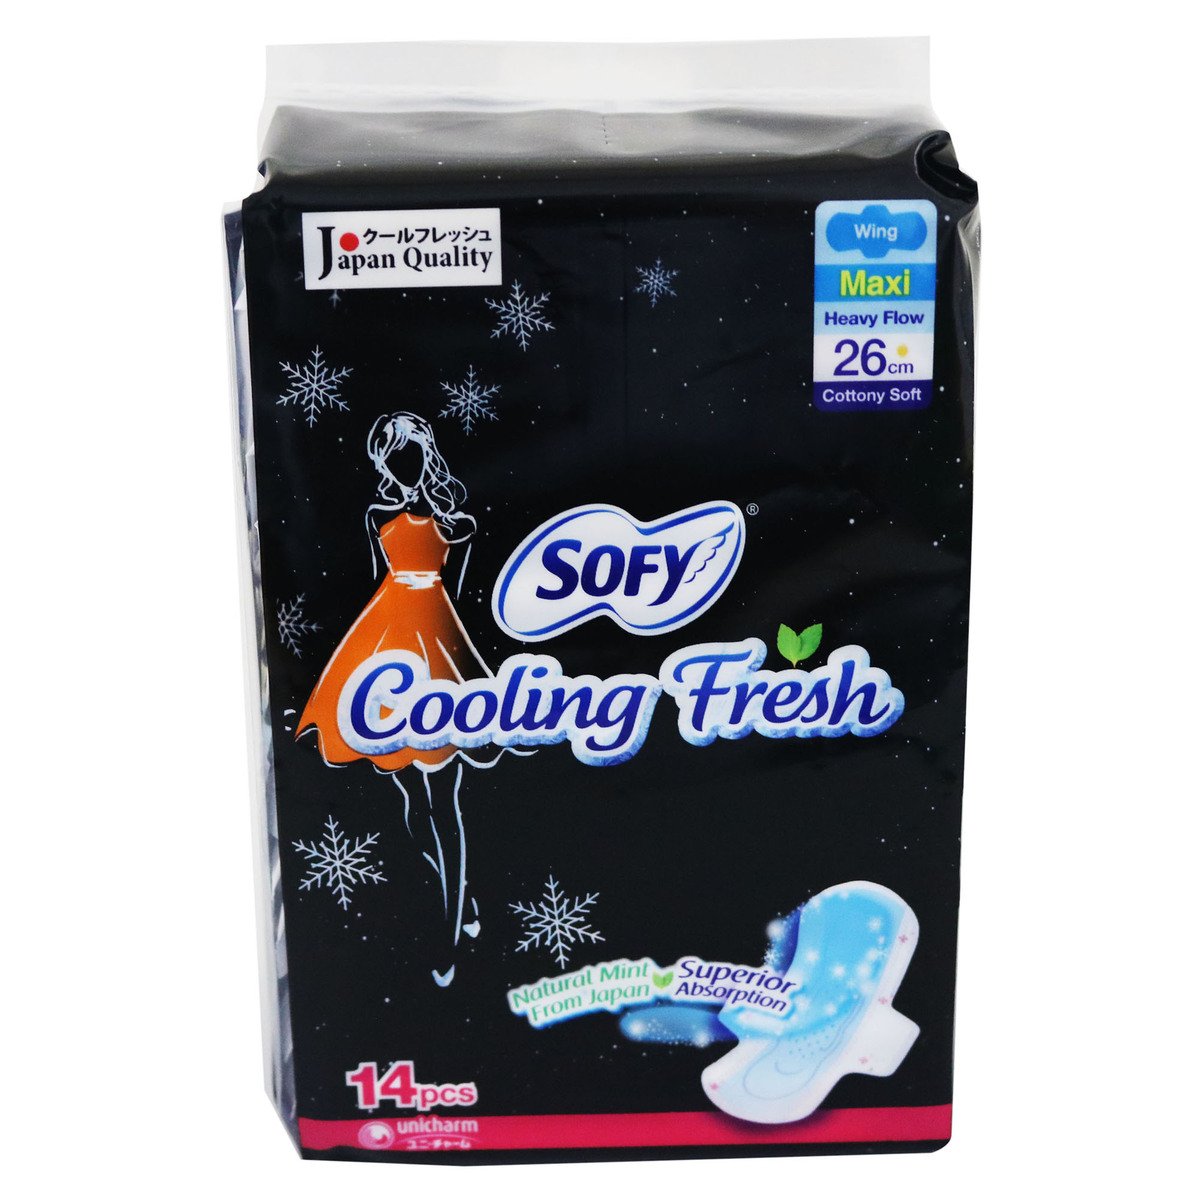 Sofy Cooling Fresh Day Maxi Wing 26cm 14 Counts